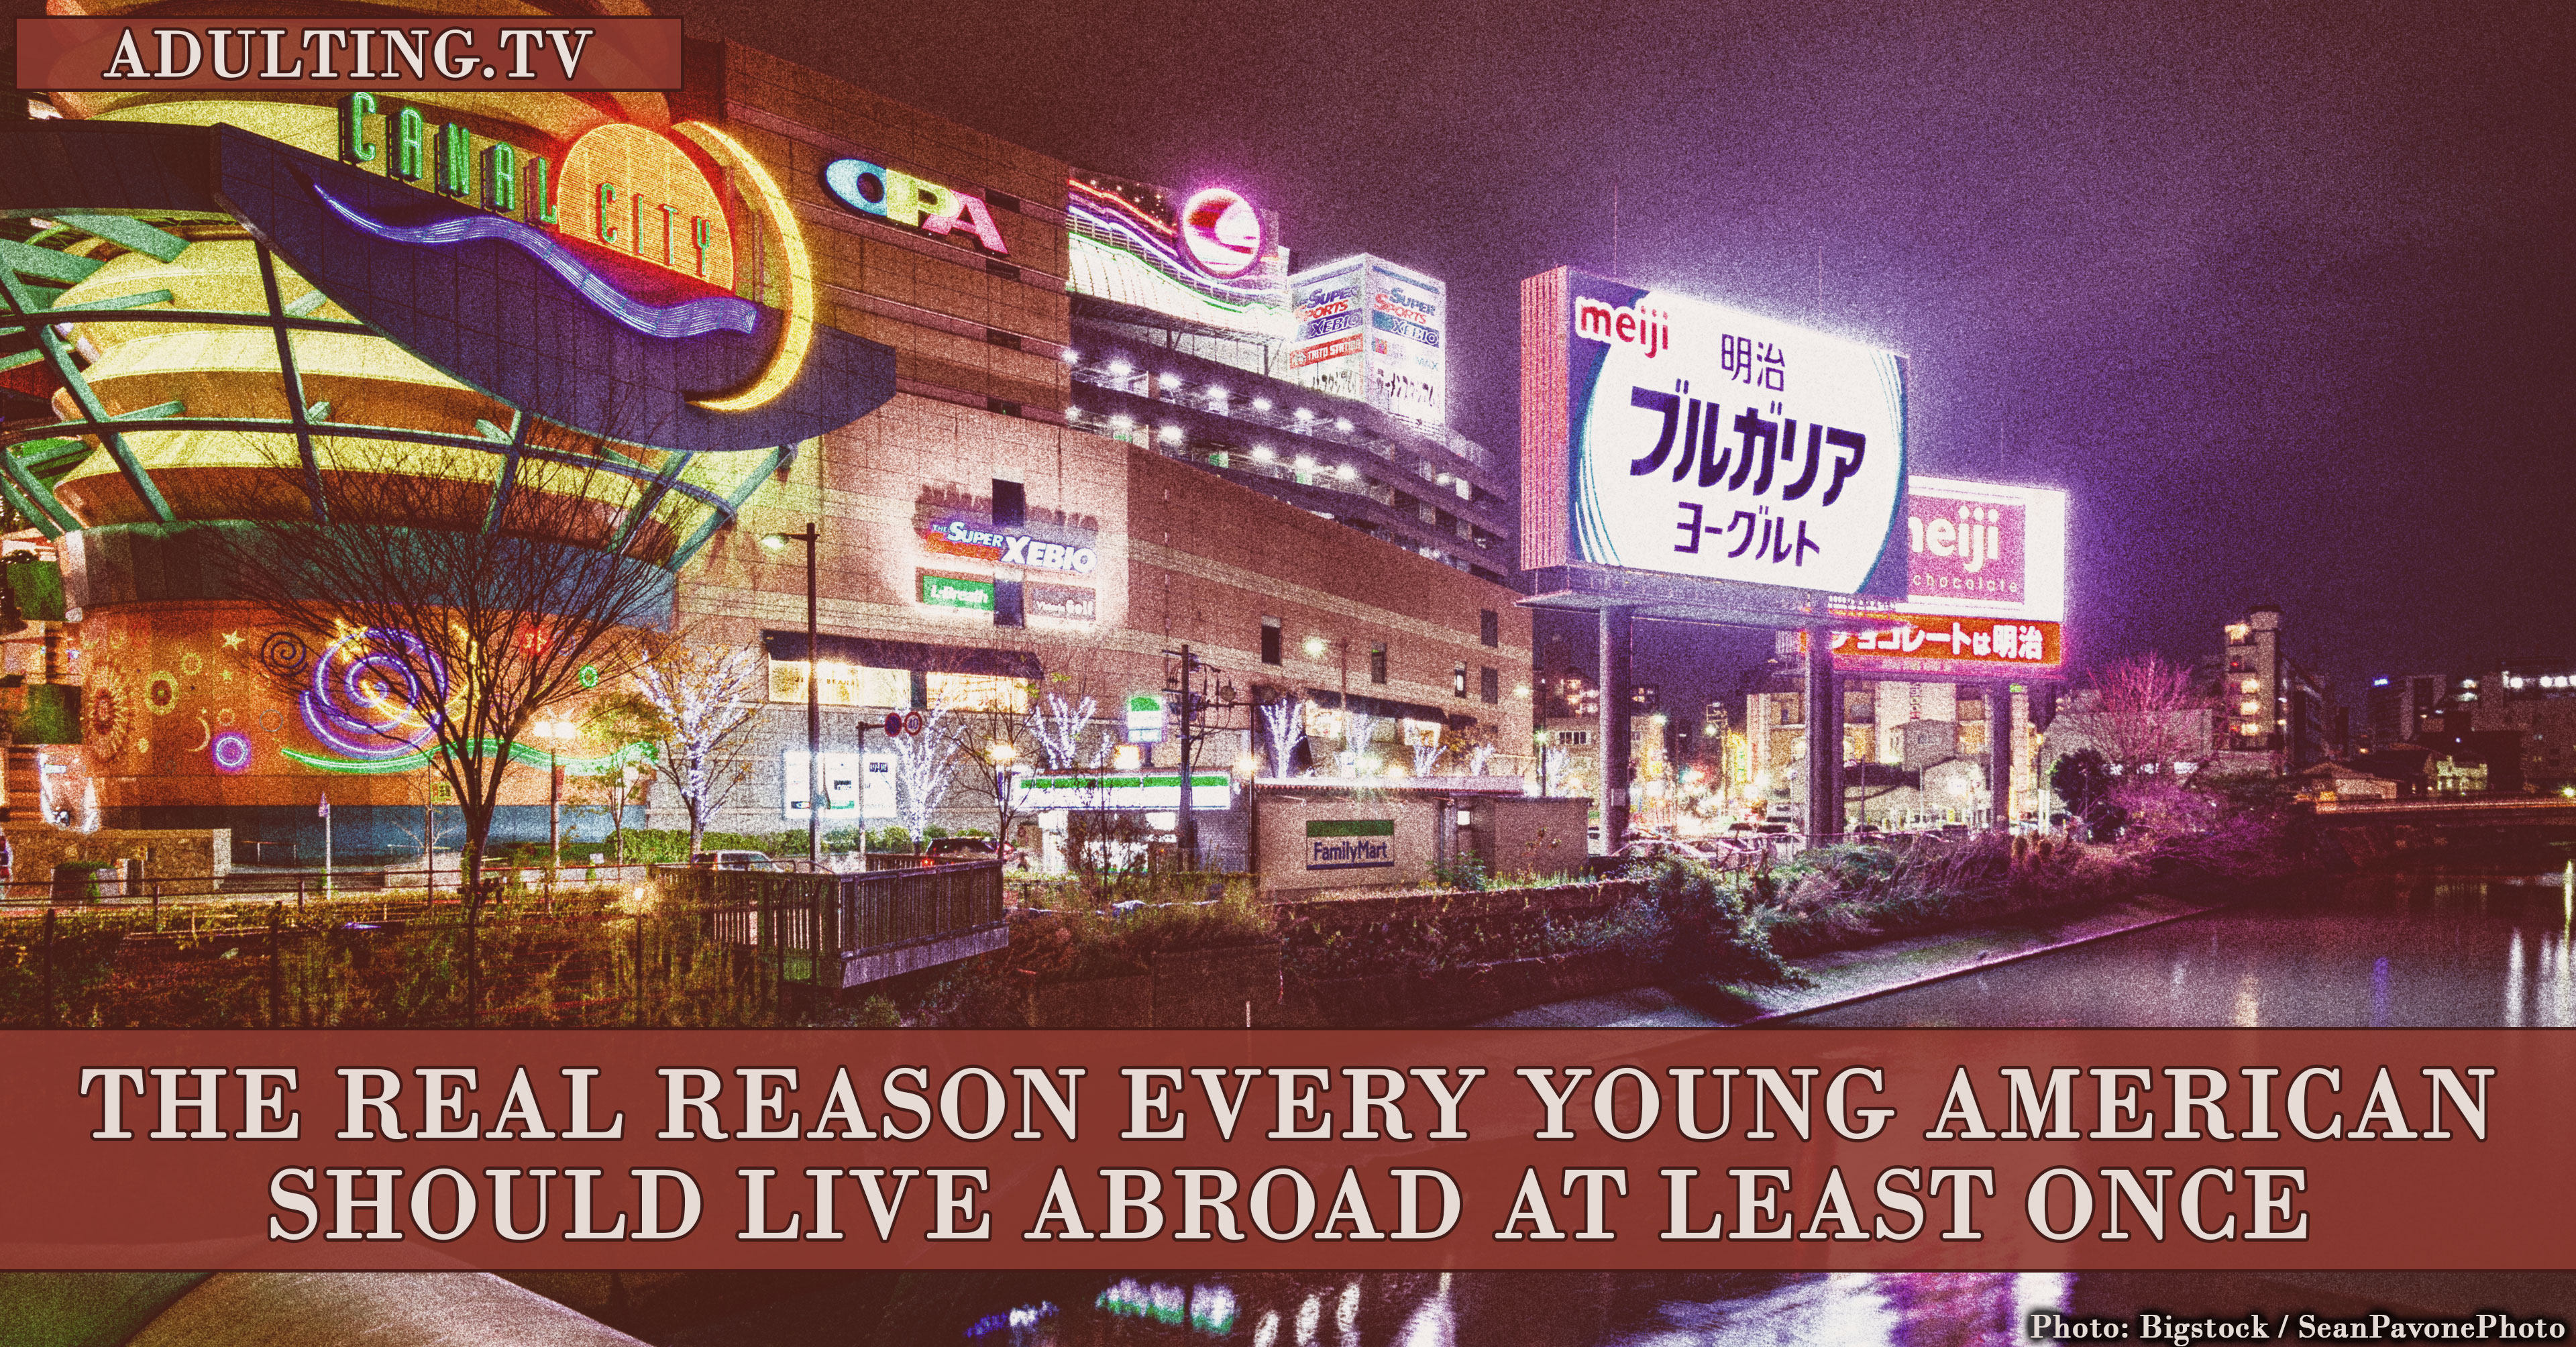 The Real Reason Every Young American Should Live Abroad at Least Once